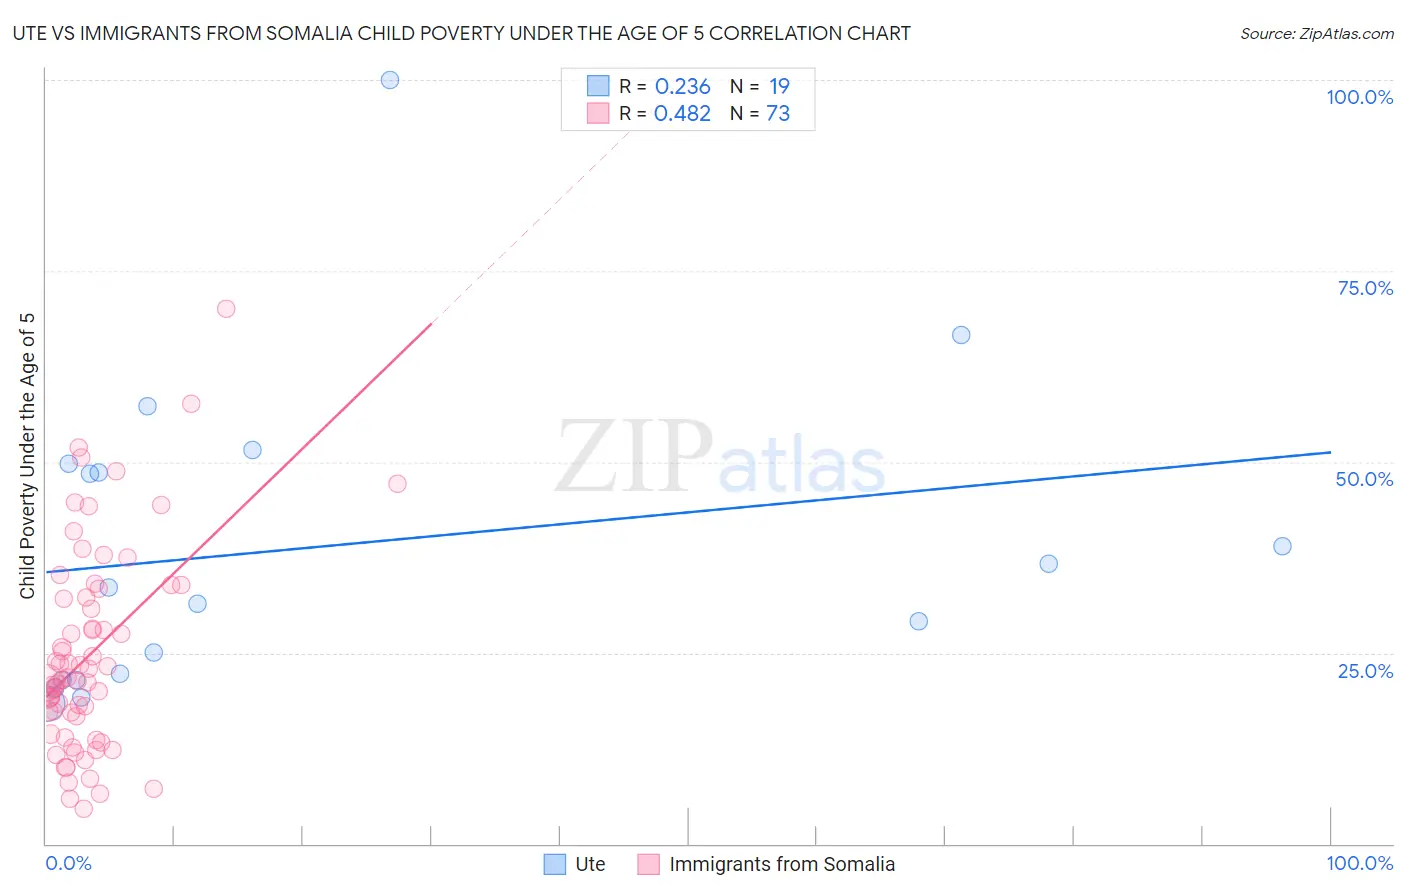 Ute vs Immigrants from Somalia Child Poverty Under the Age of 5